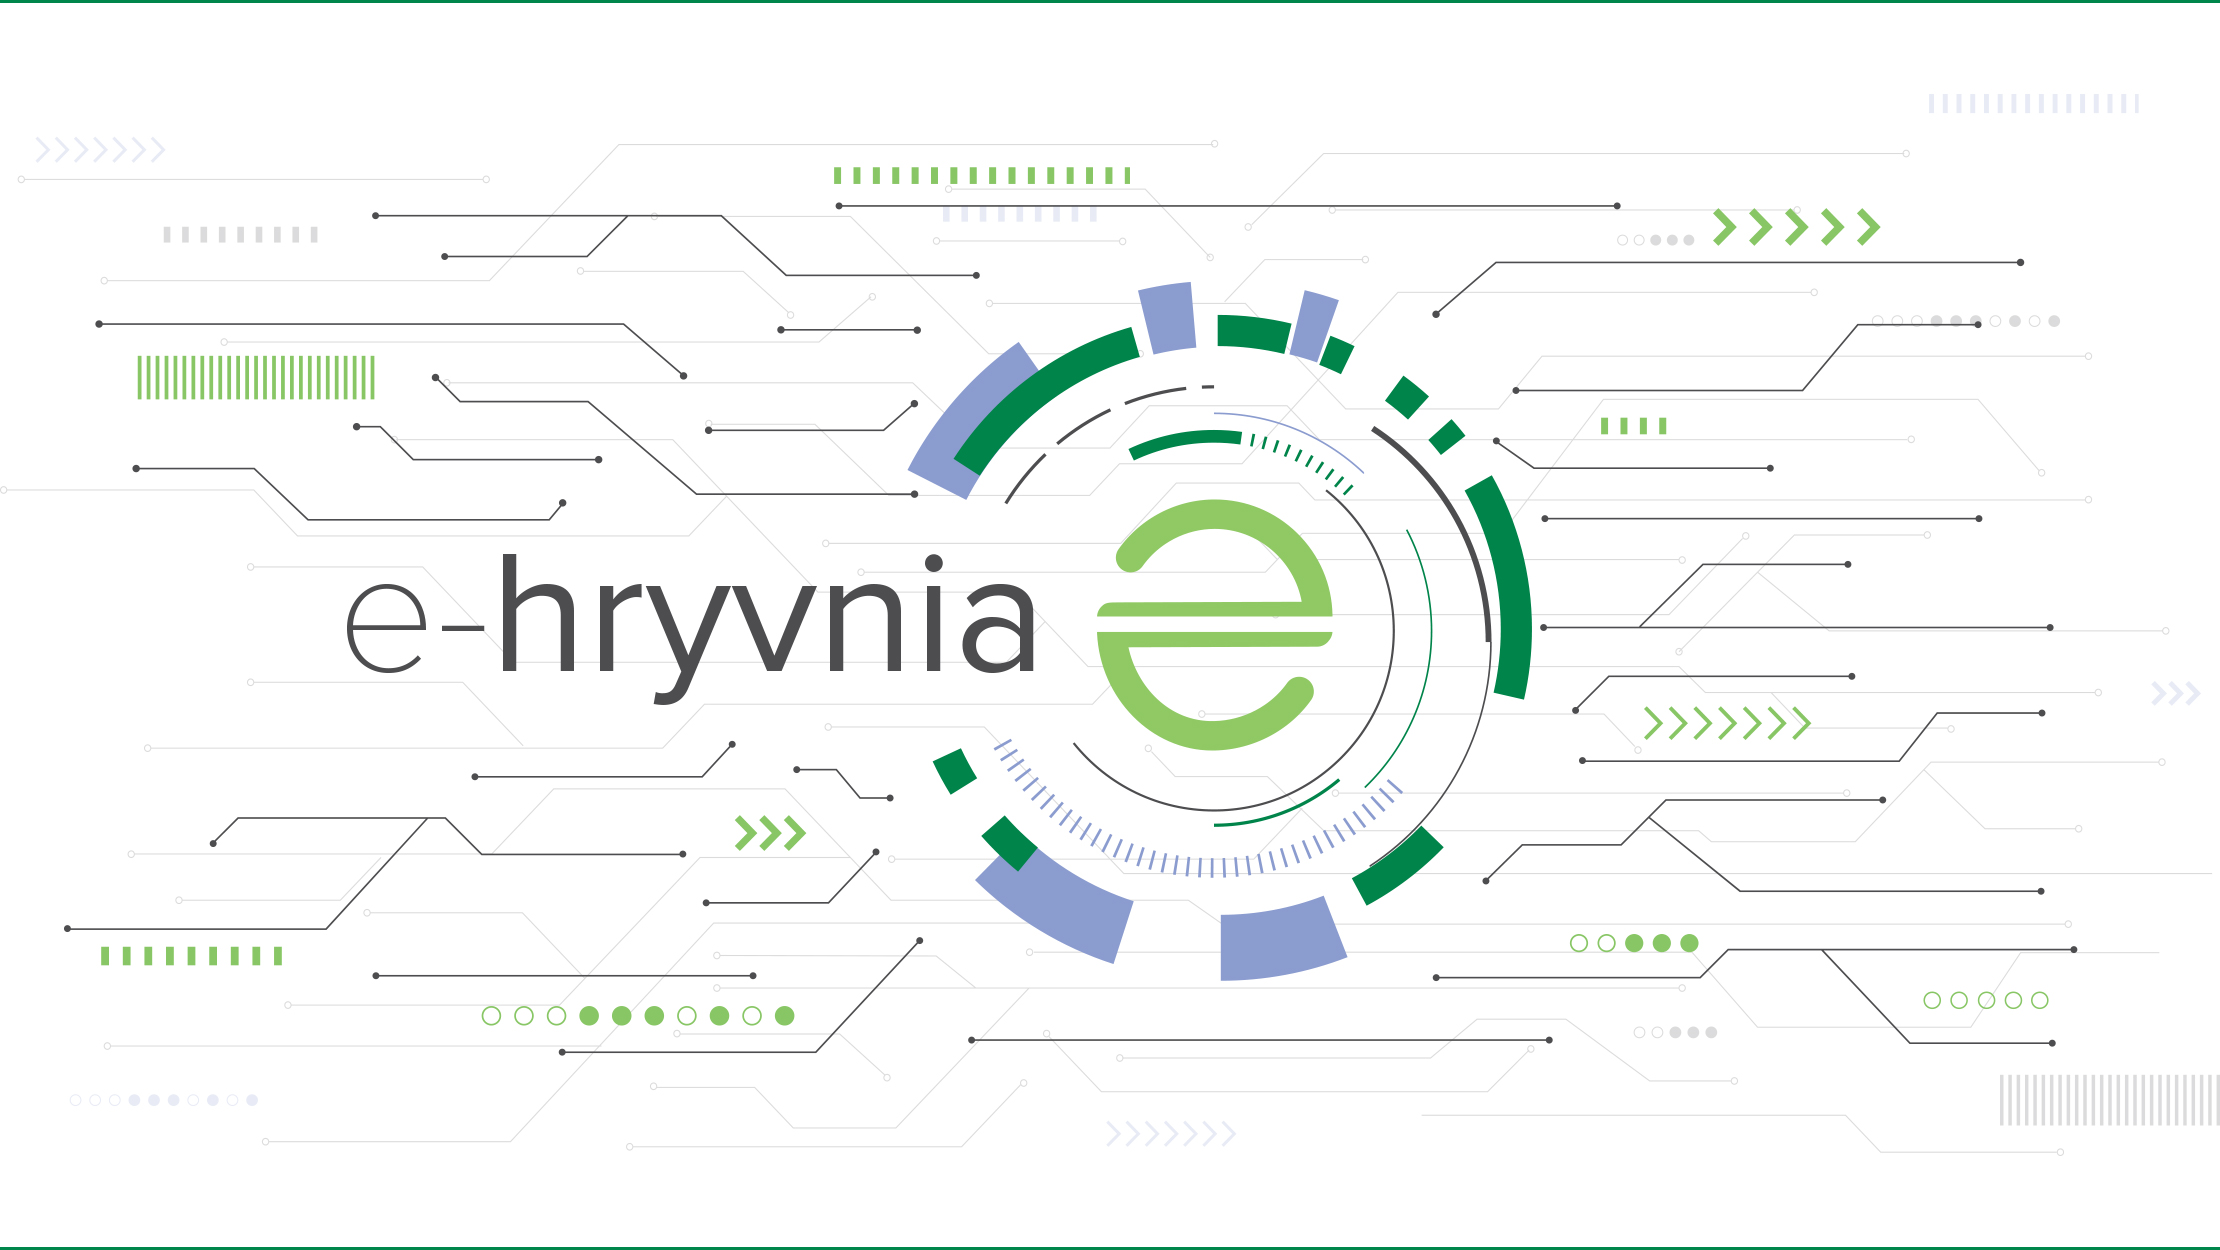 NBU to Continue to Look into Possibility of Issuing Its Own Digital Currency – the E-hryvnia